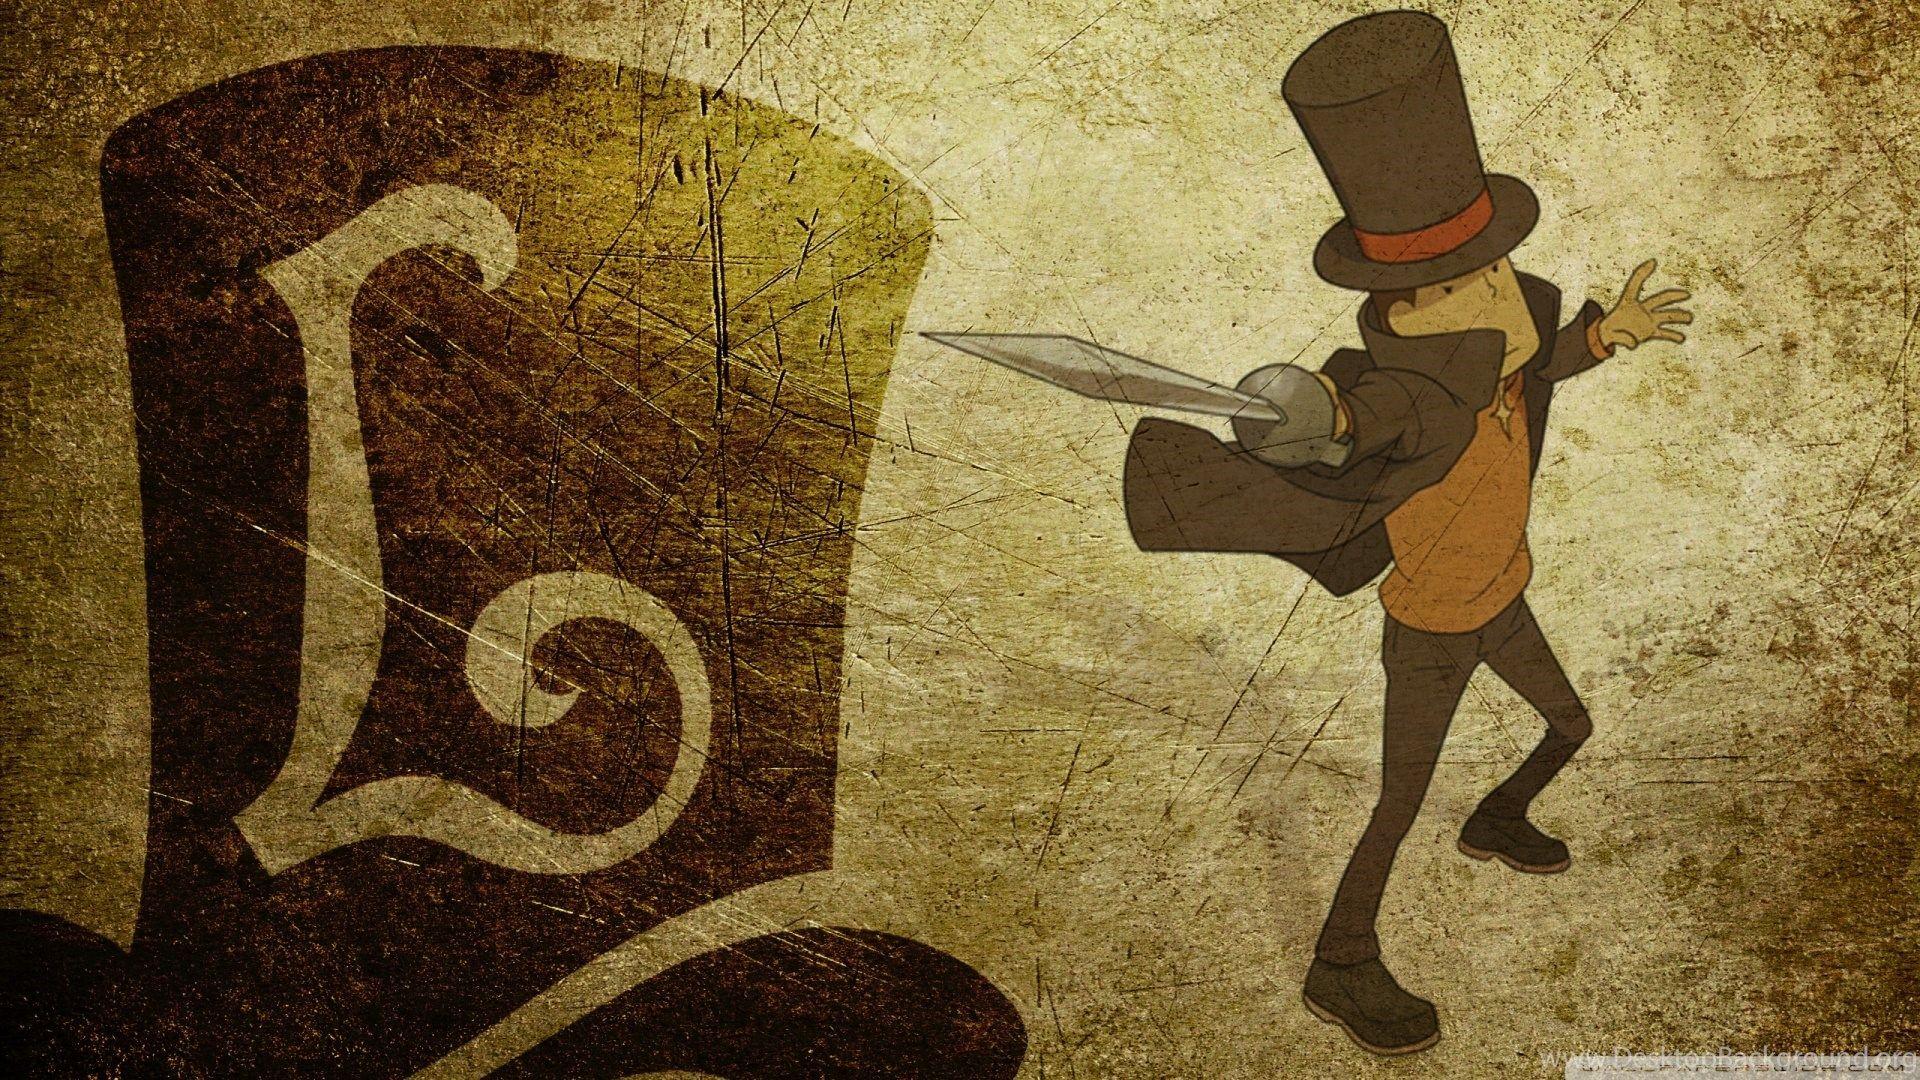 Download Professor Layton And The Curious Village Wallpaper